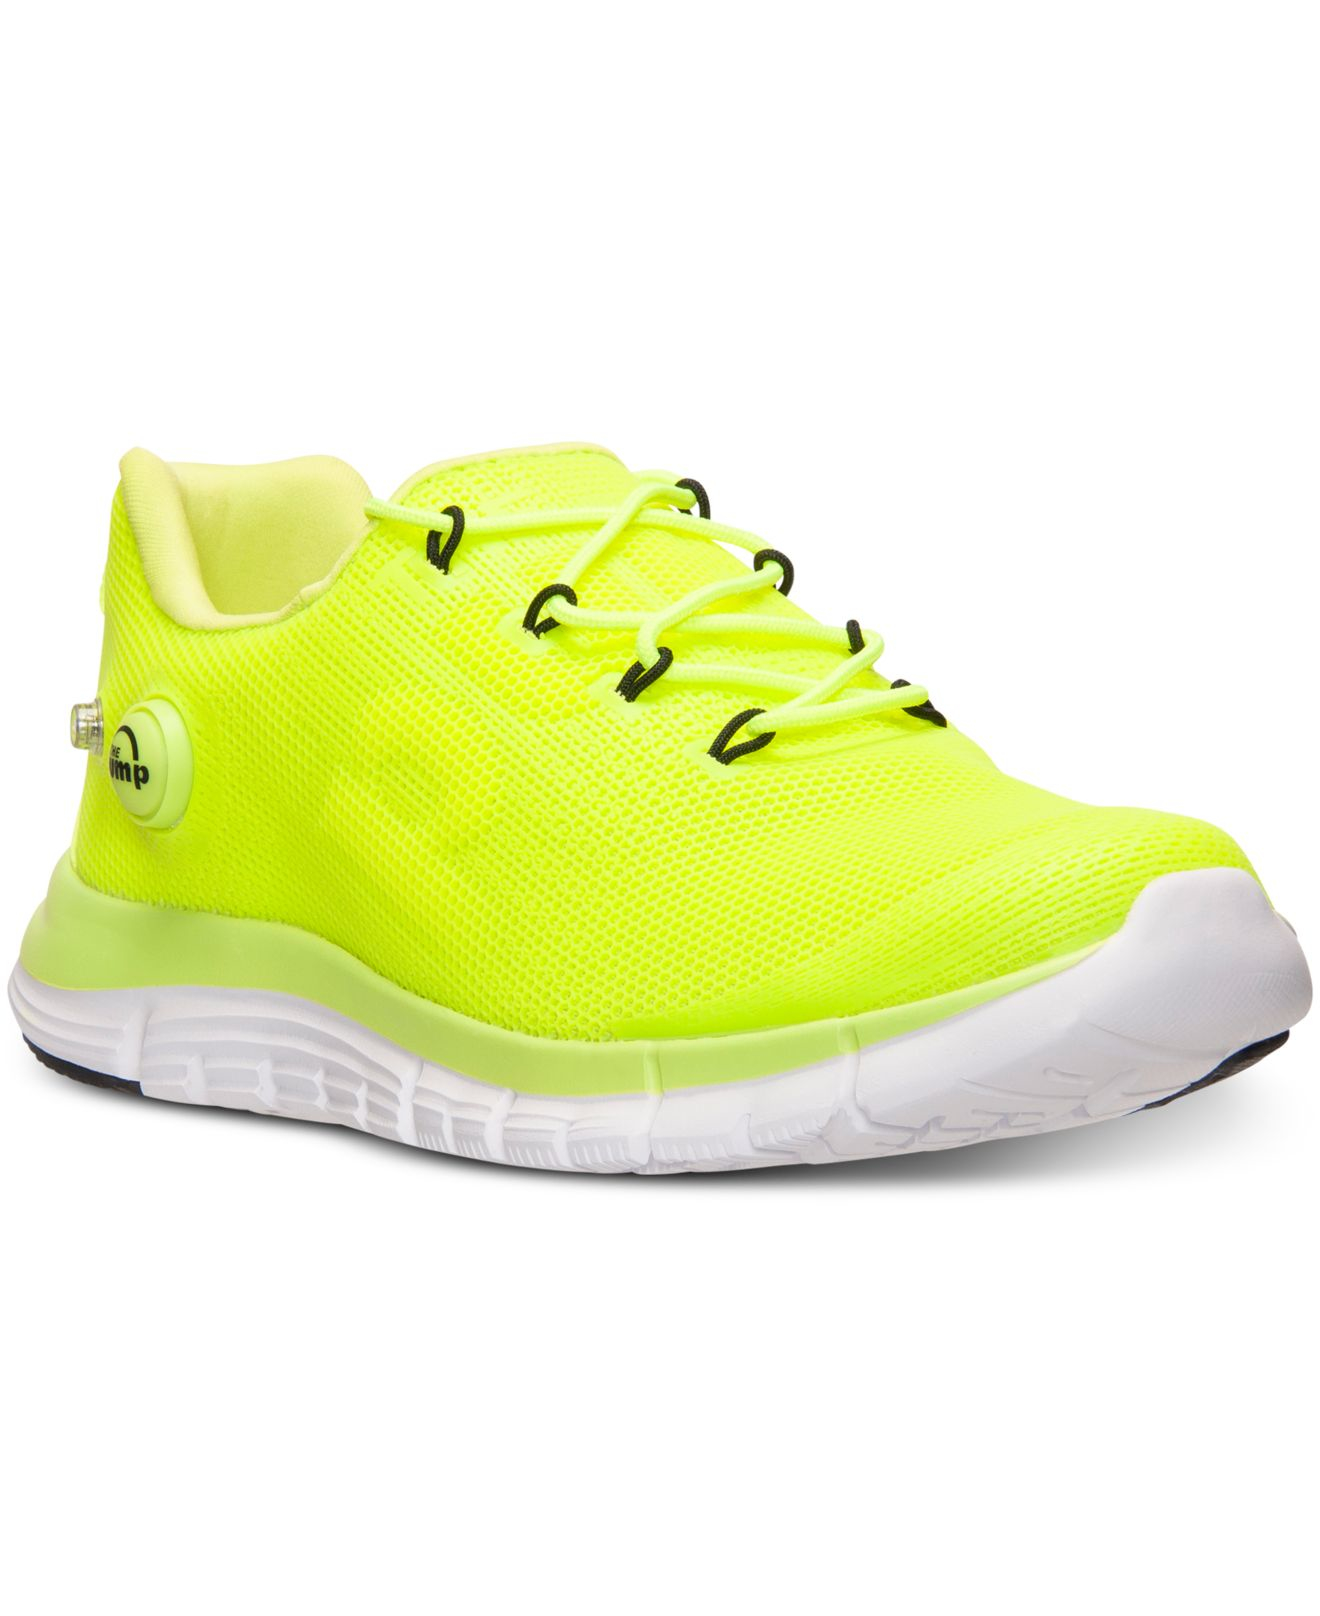 reebok zpump fusion Online Shopping for 